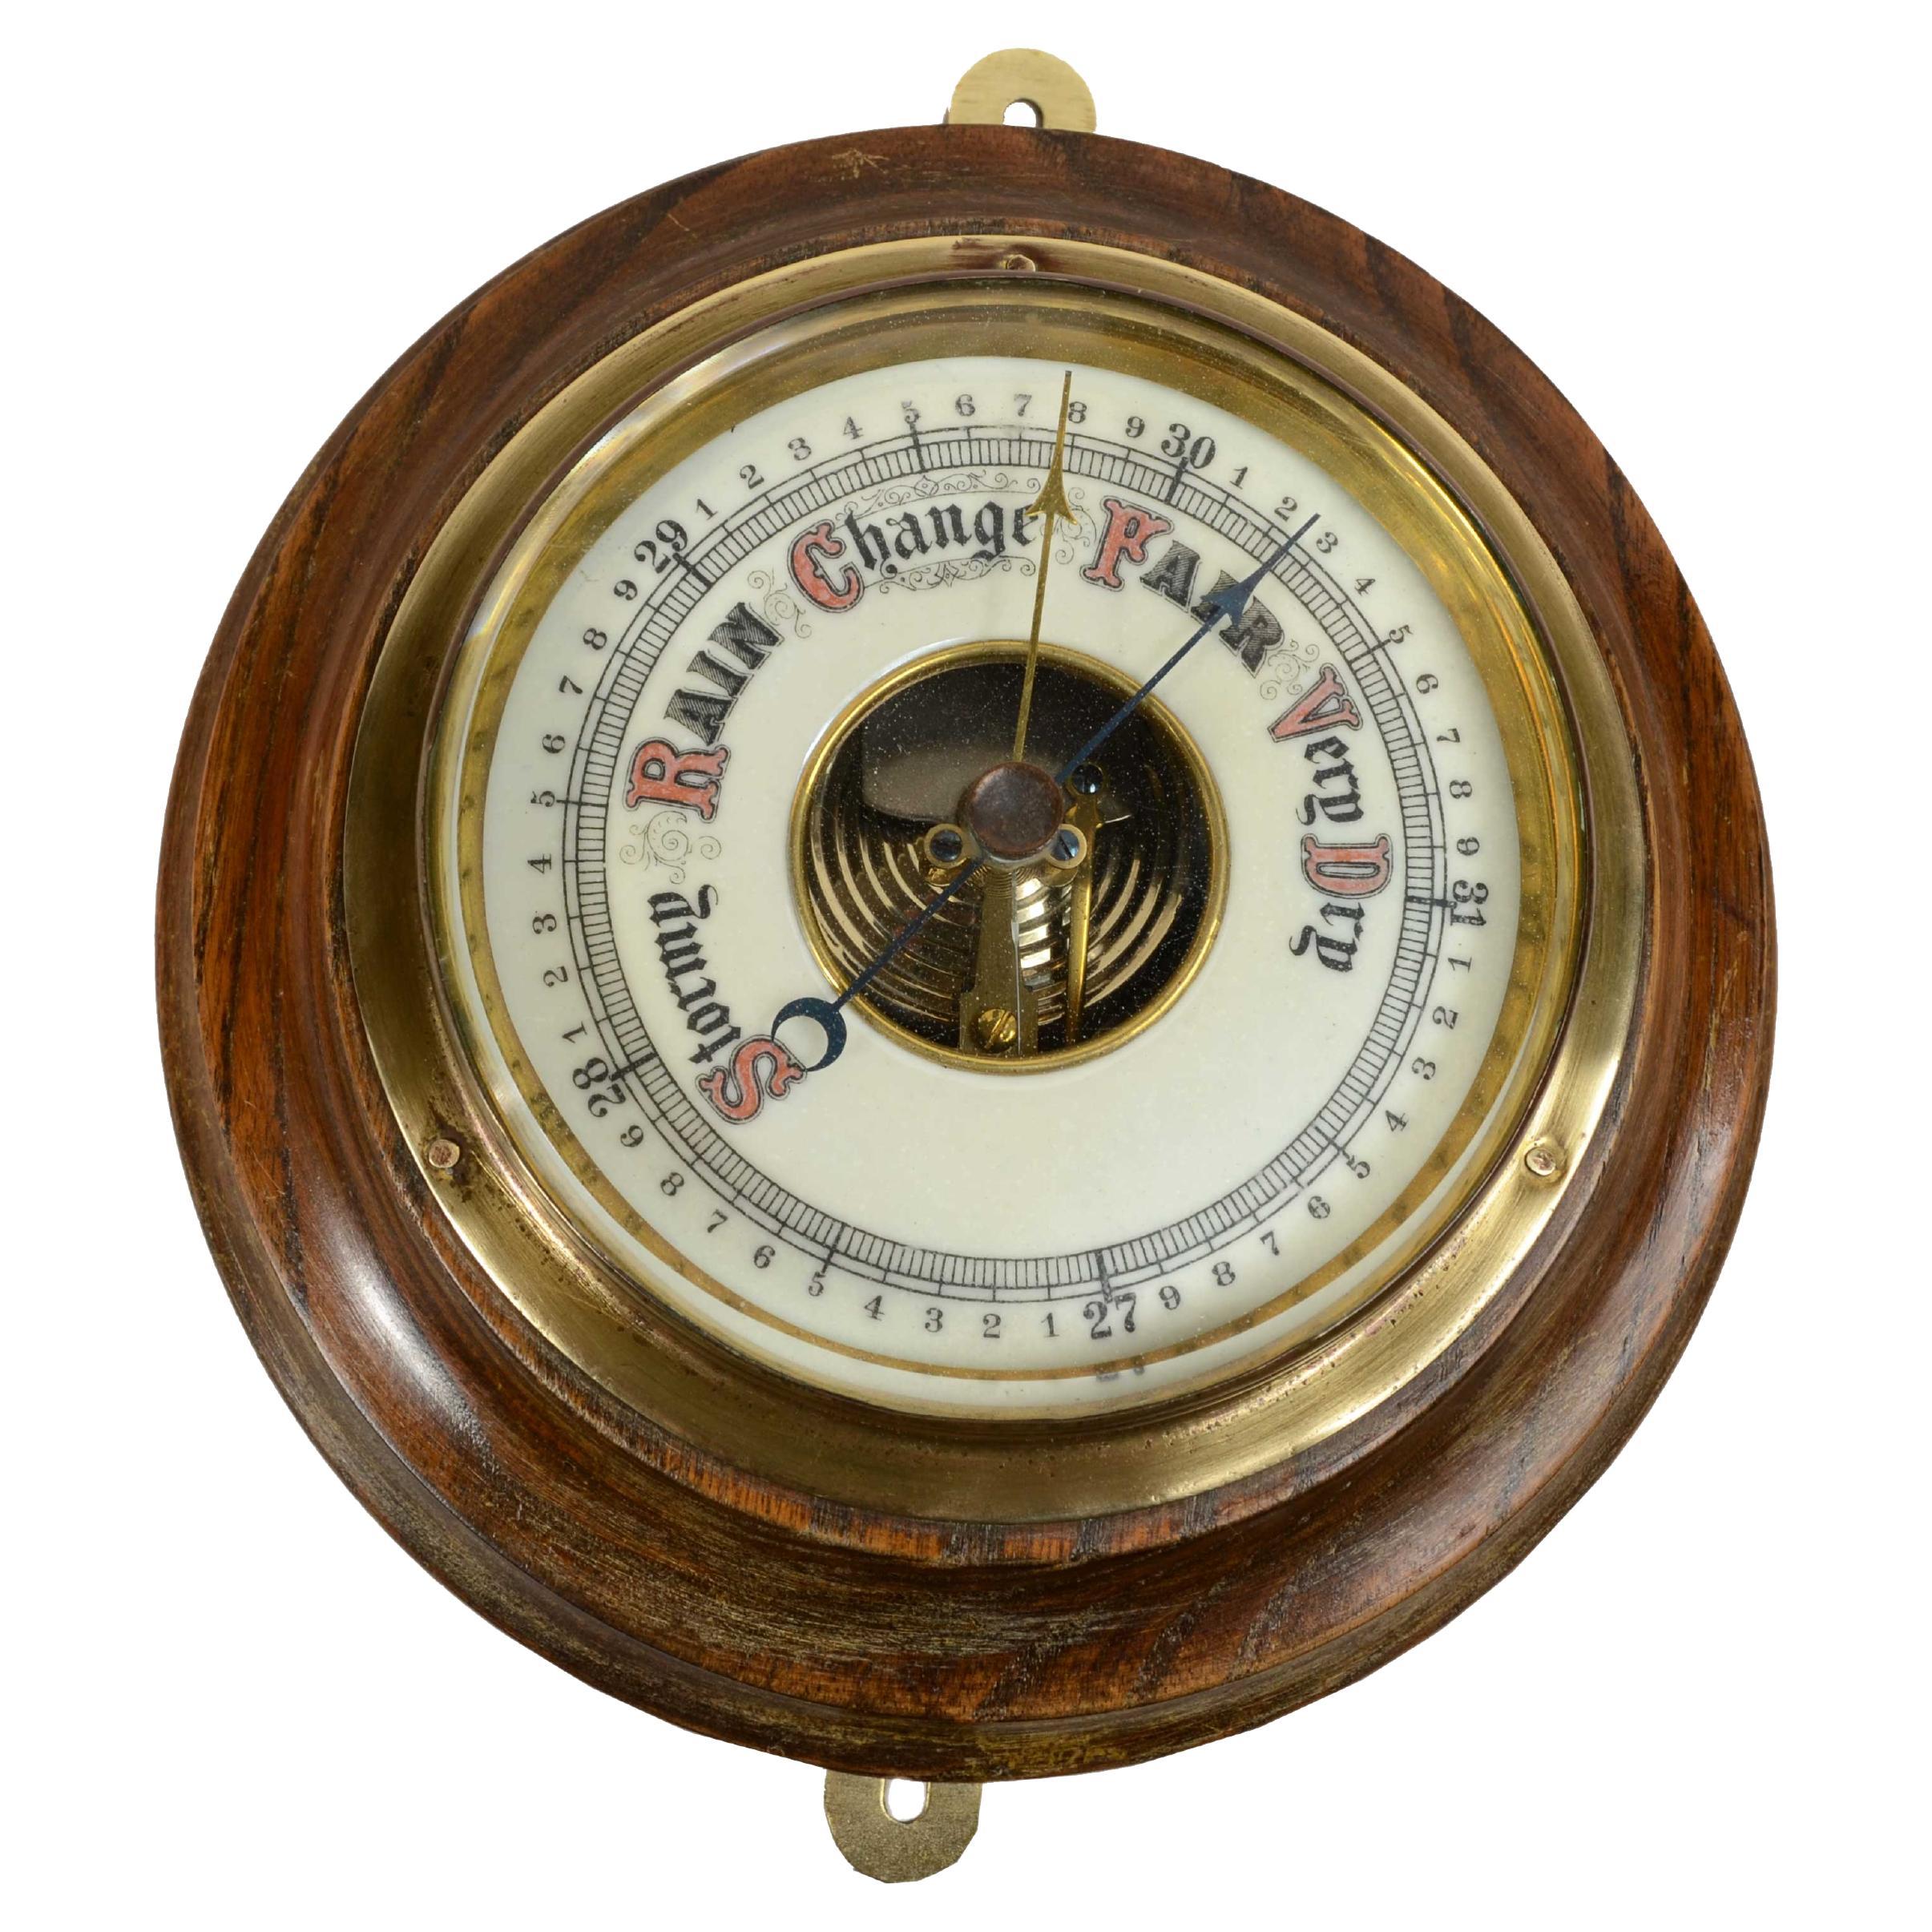 Antique English aneroid barometer from the 1930s made of turned wood and brass  